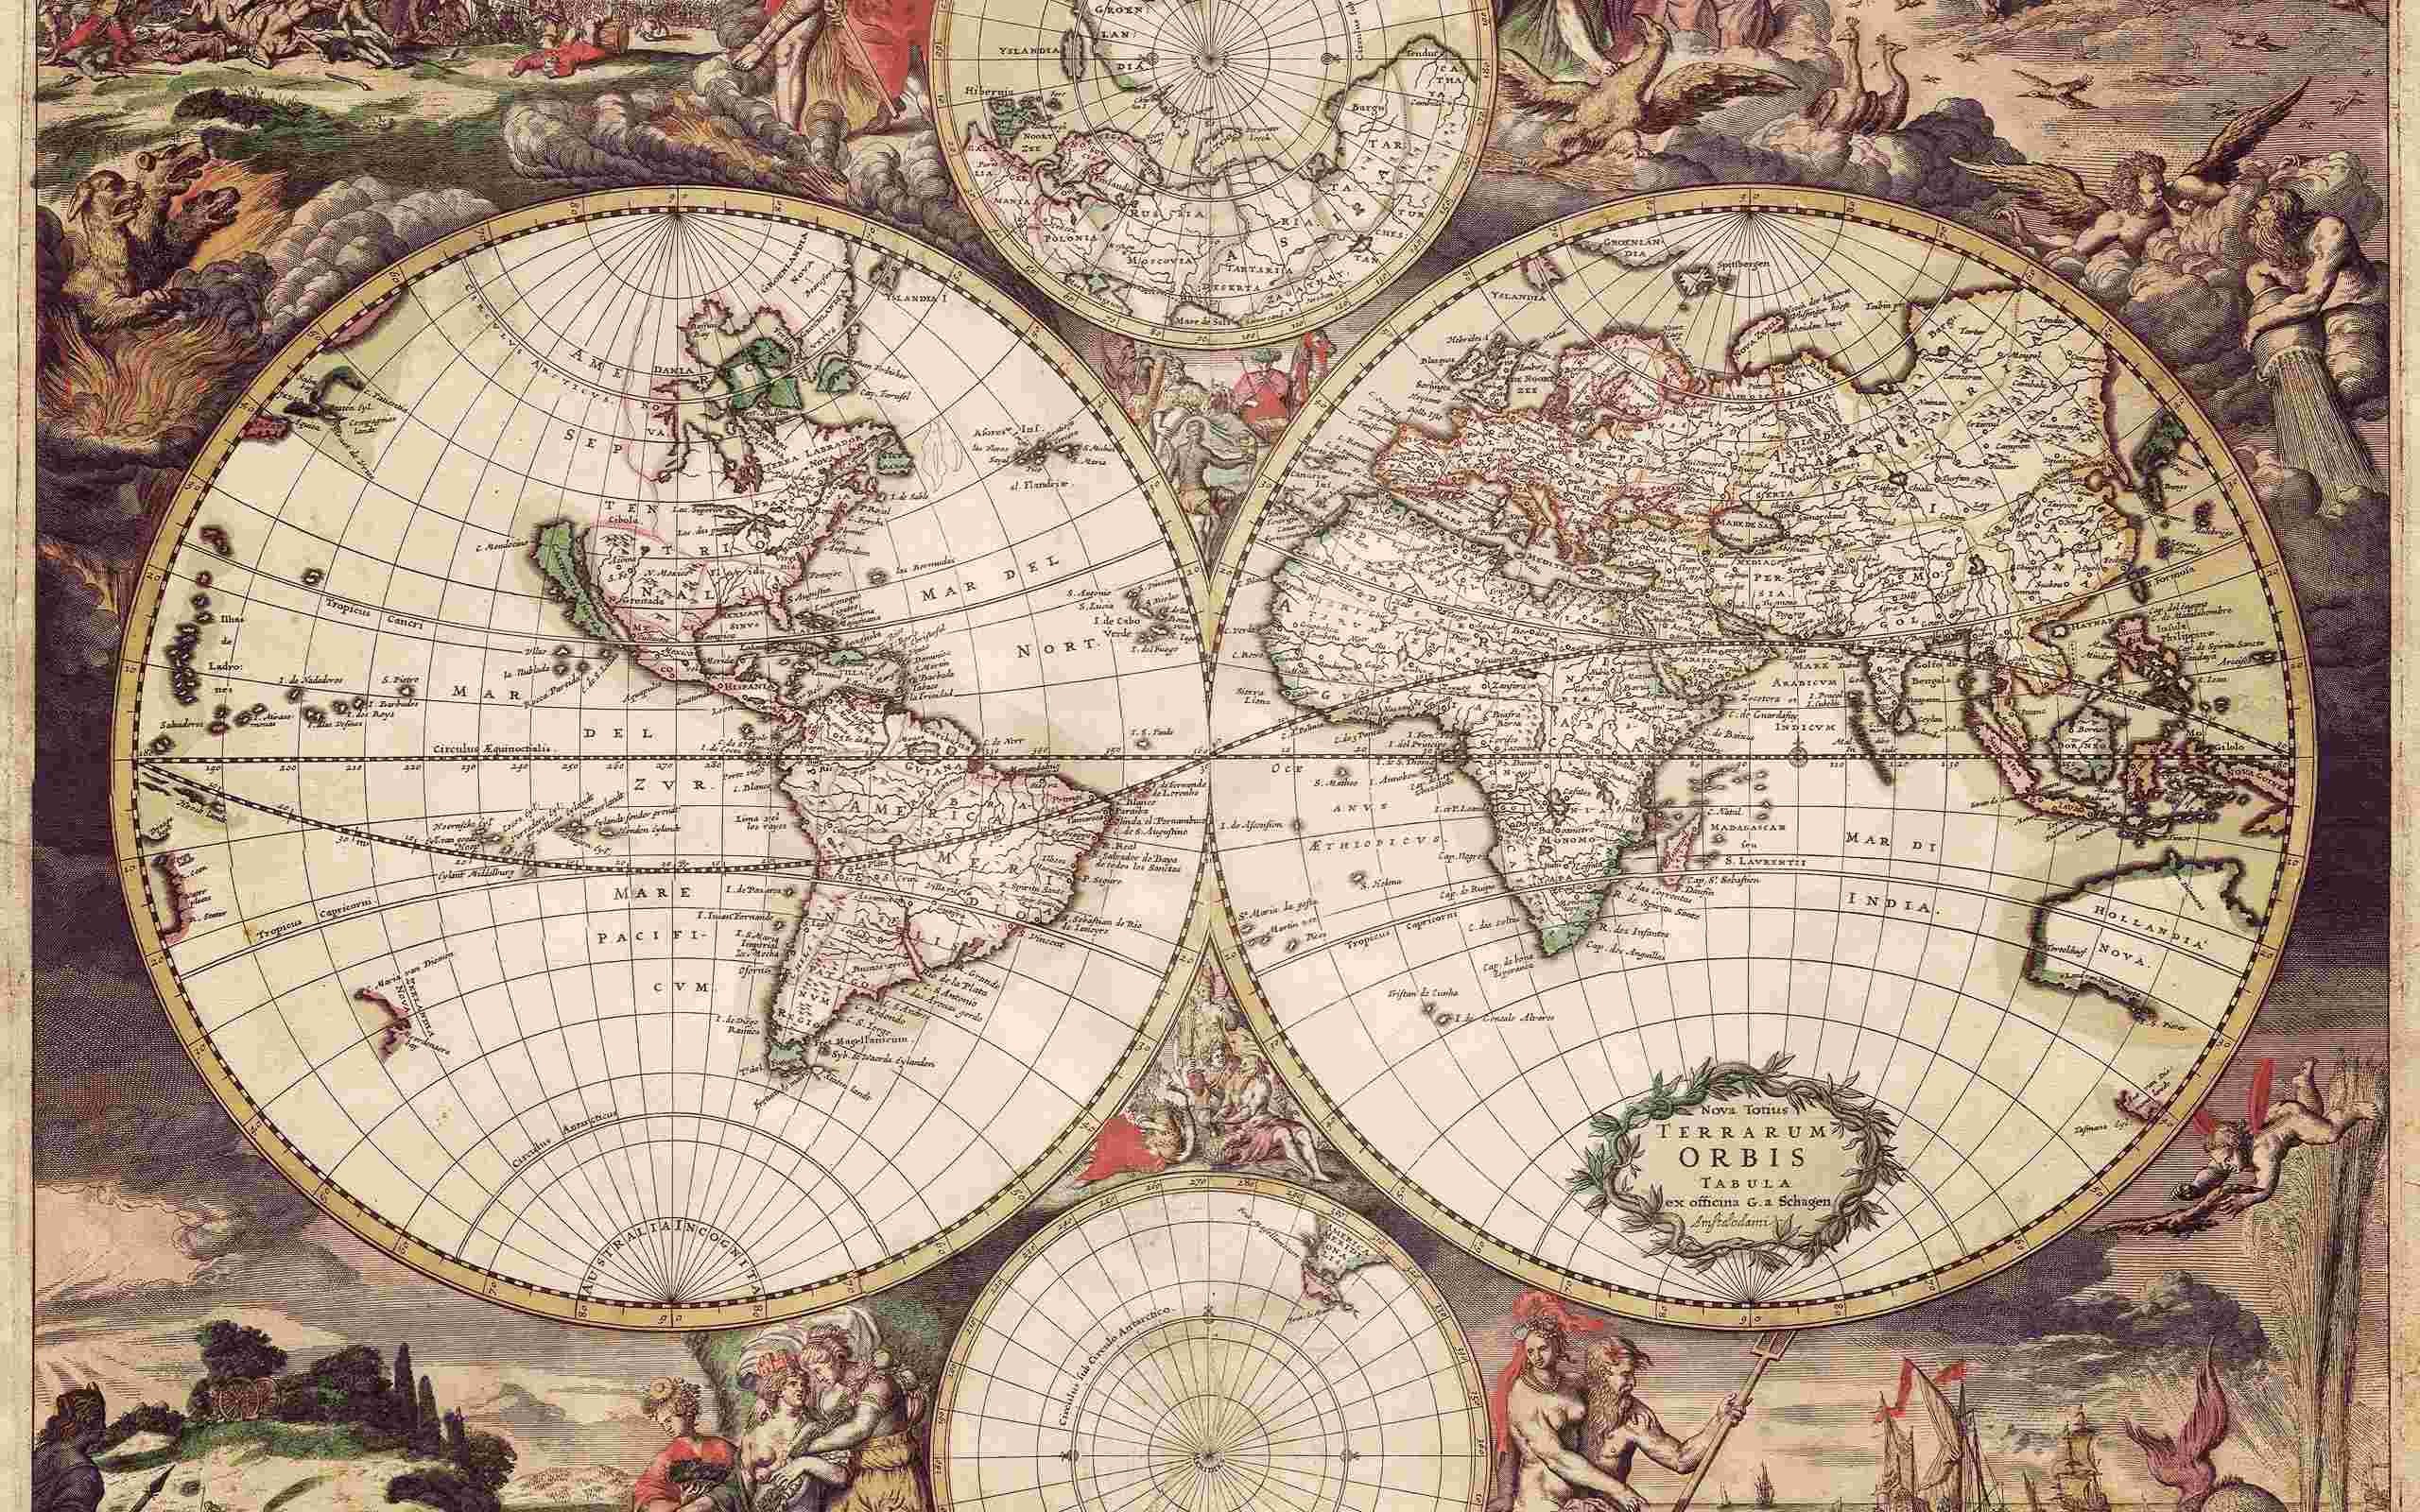 2560x1600 Old World map, 1689 wallpaper - Unsorted - Other - Wallpaper .